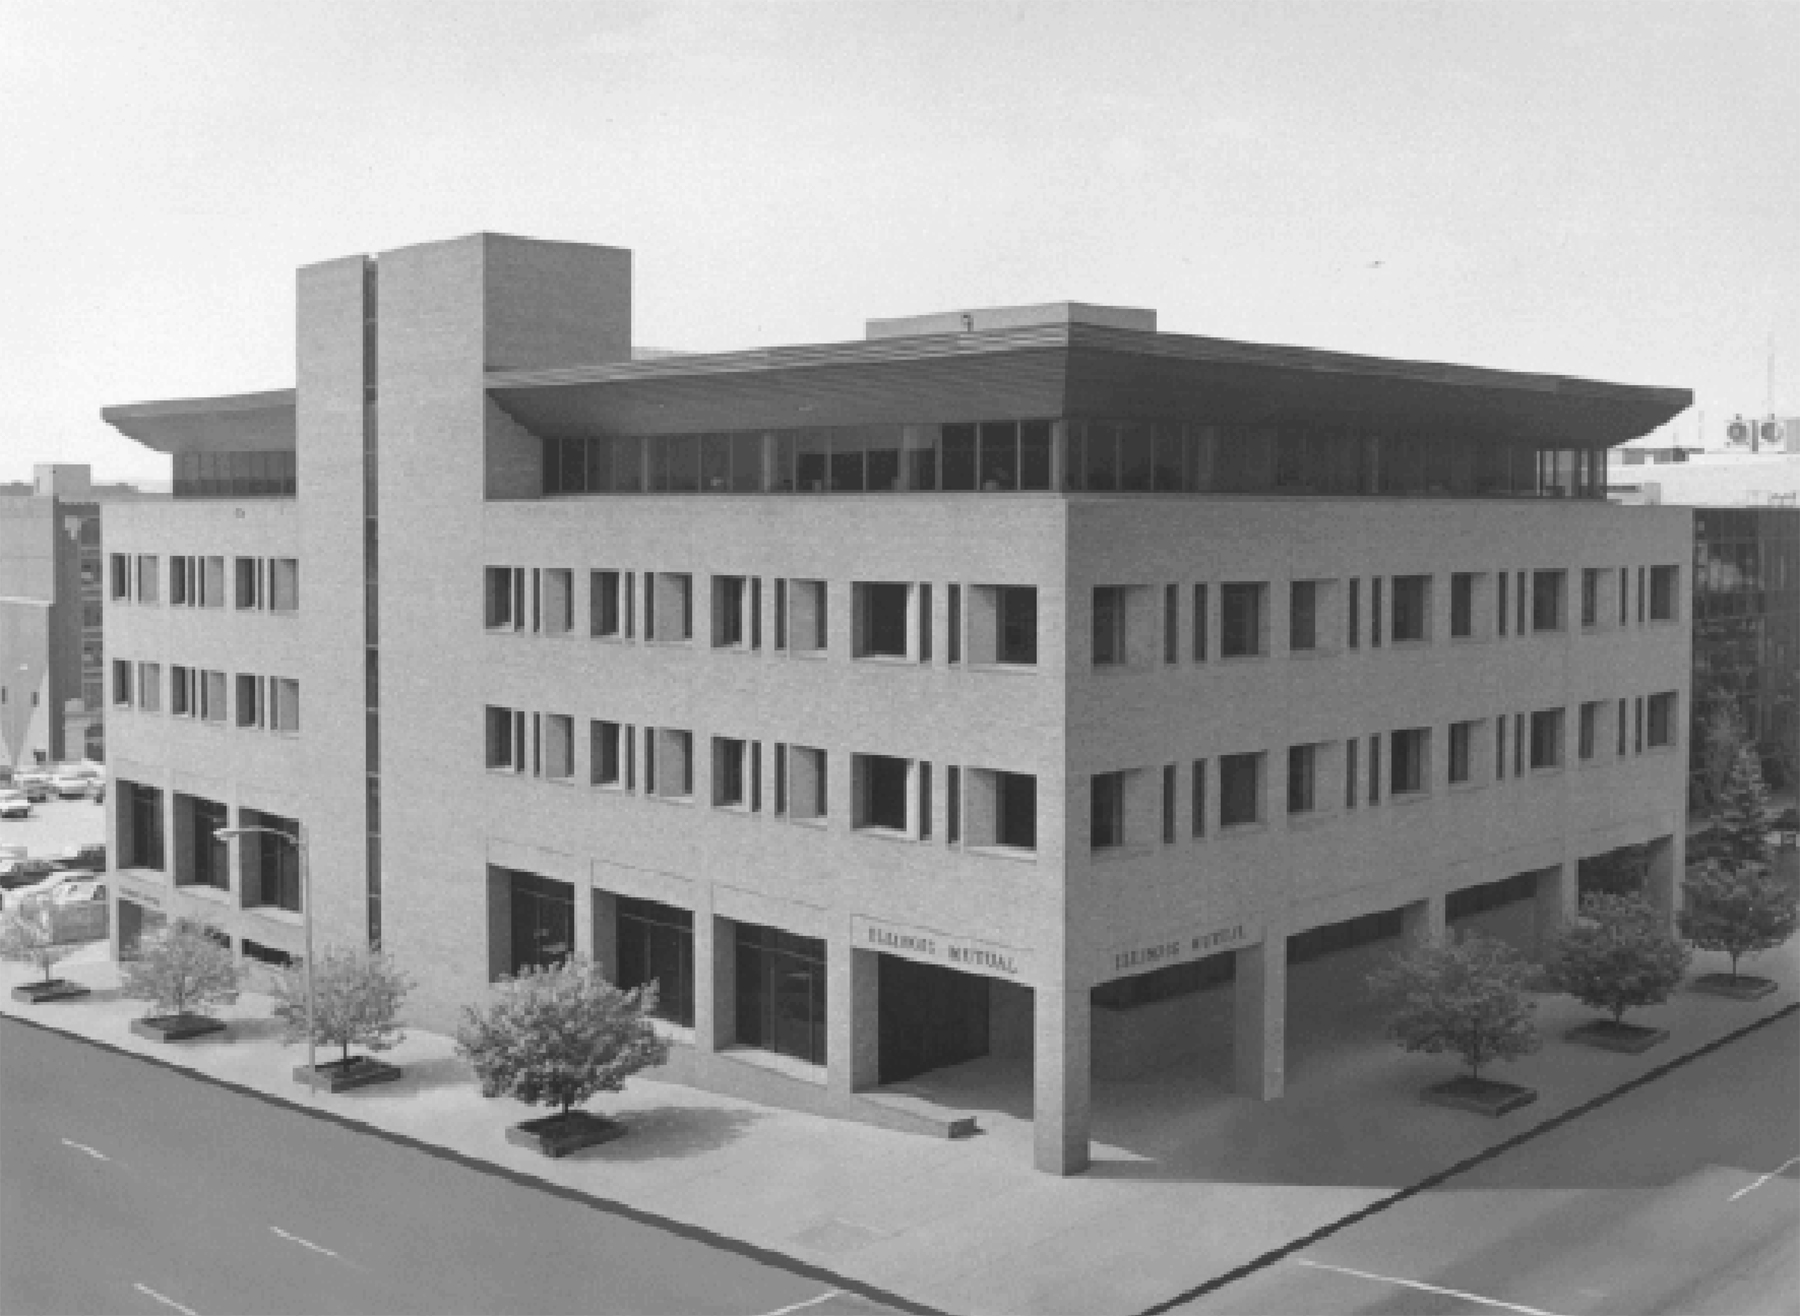 The home office building of Illinois Mutual in Peoria, Illinois.